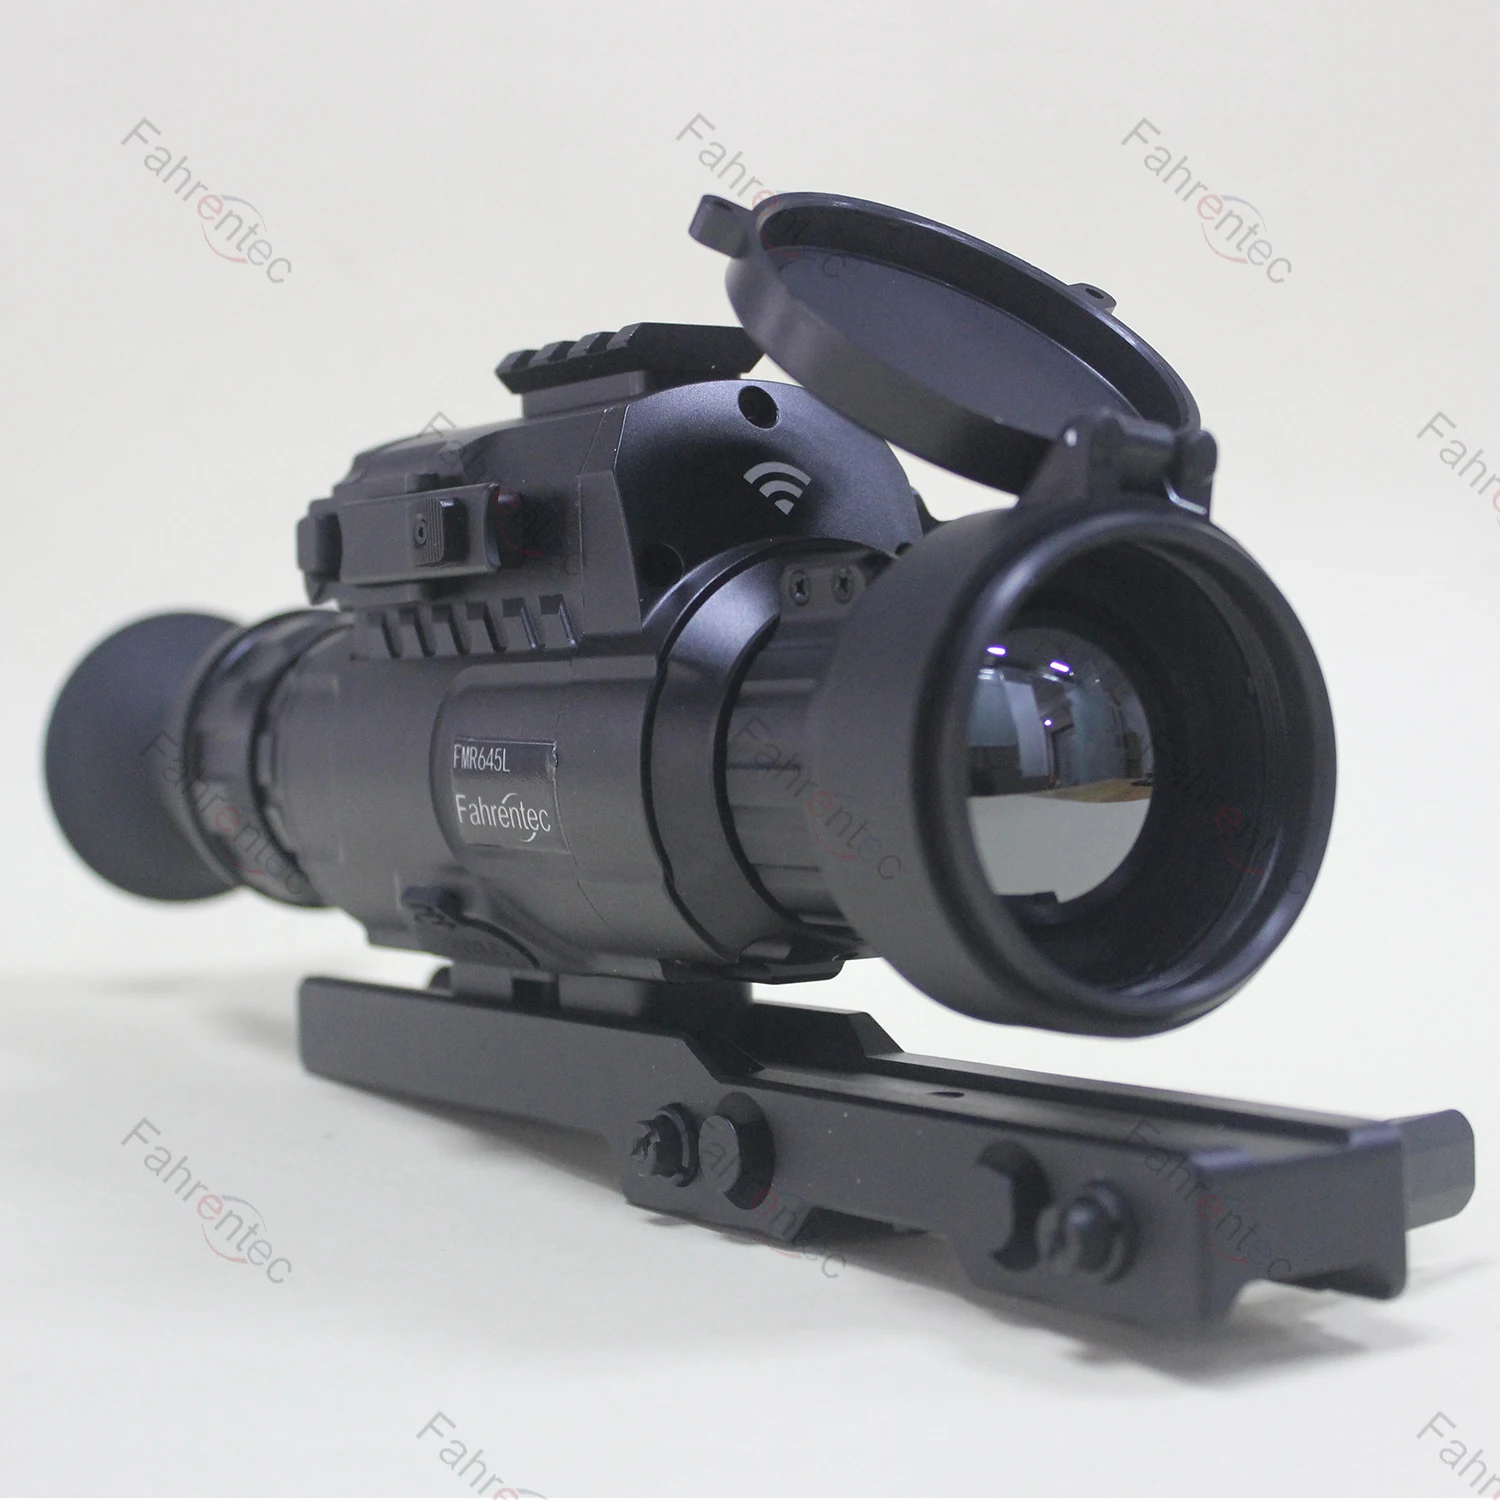 

Fahrentec Infrared Thermal Imaging Rifle Sight 640x512 45mm Night Vision Scope, 32G Memory, WiFi, Video Photo Recording